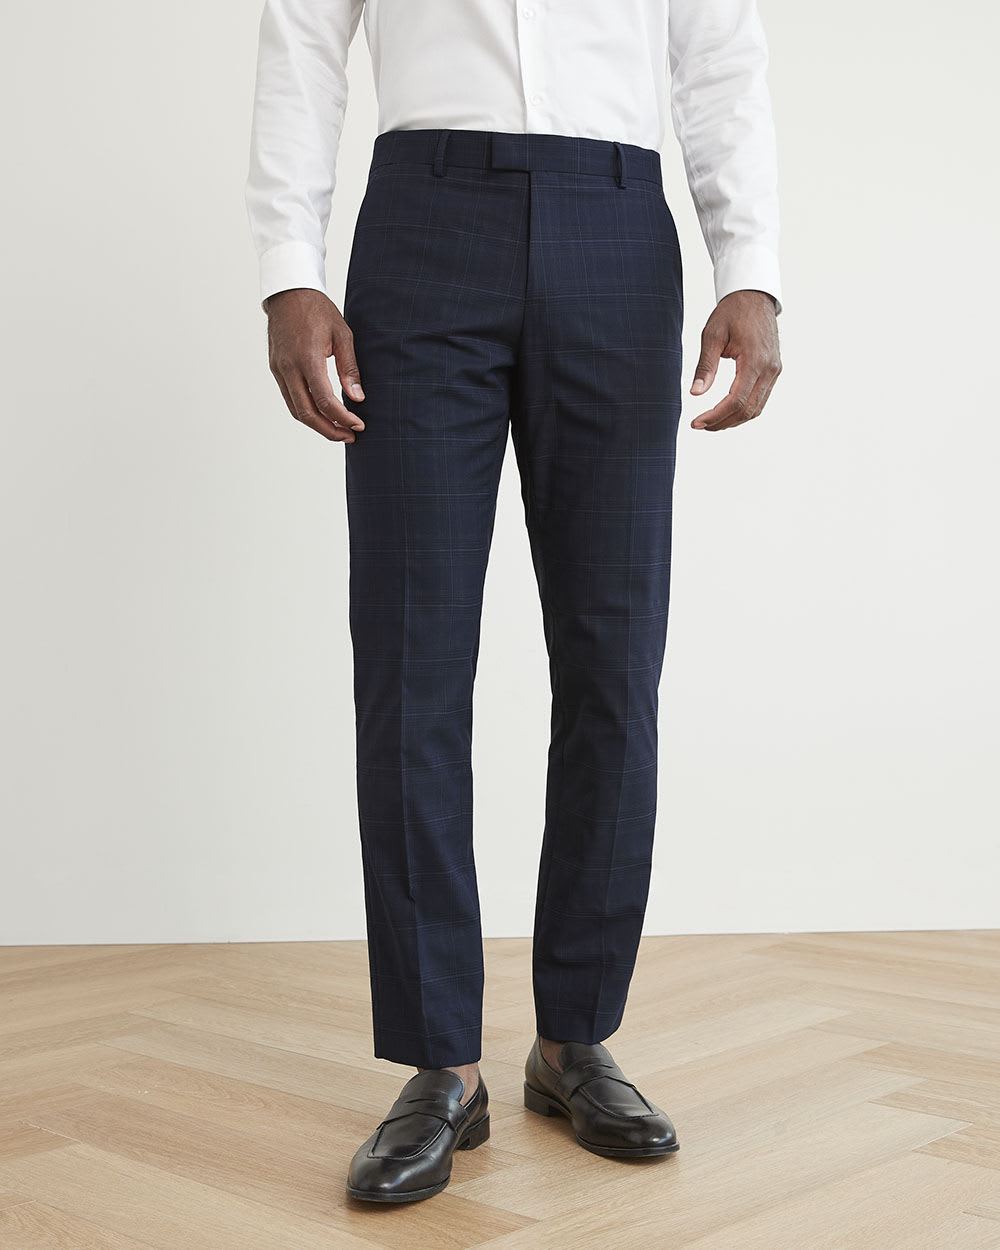 Slim-Fit Navy Checkered Suit Pant | RW&CO.